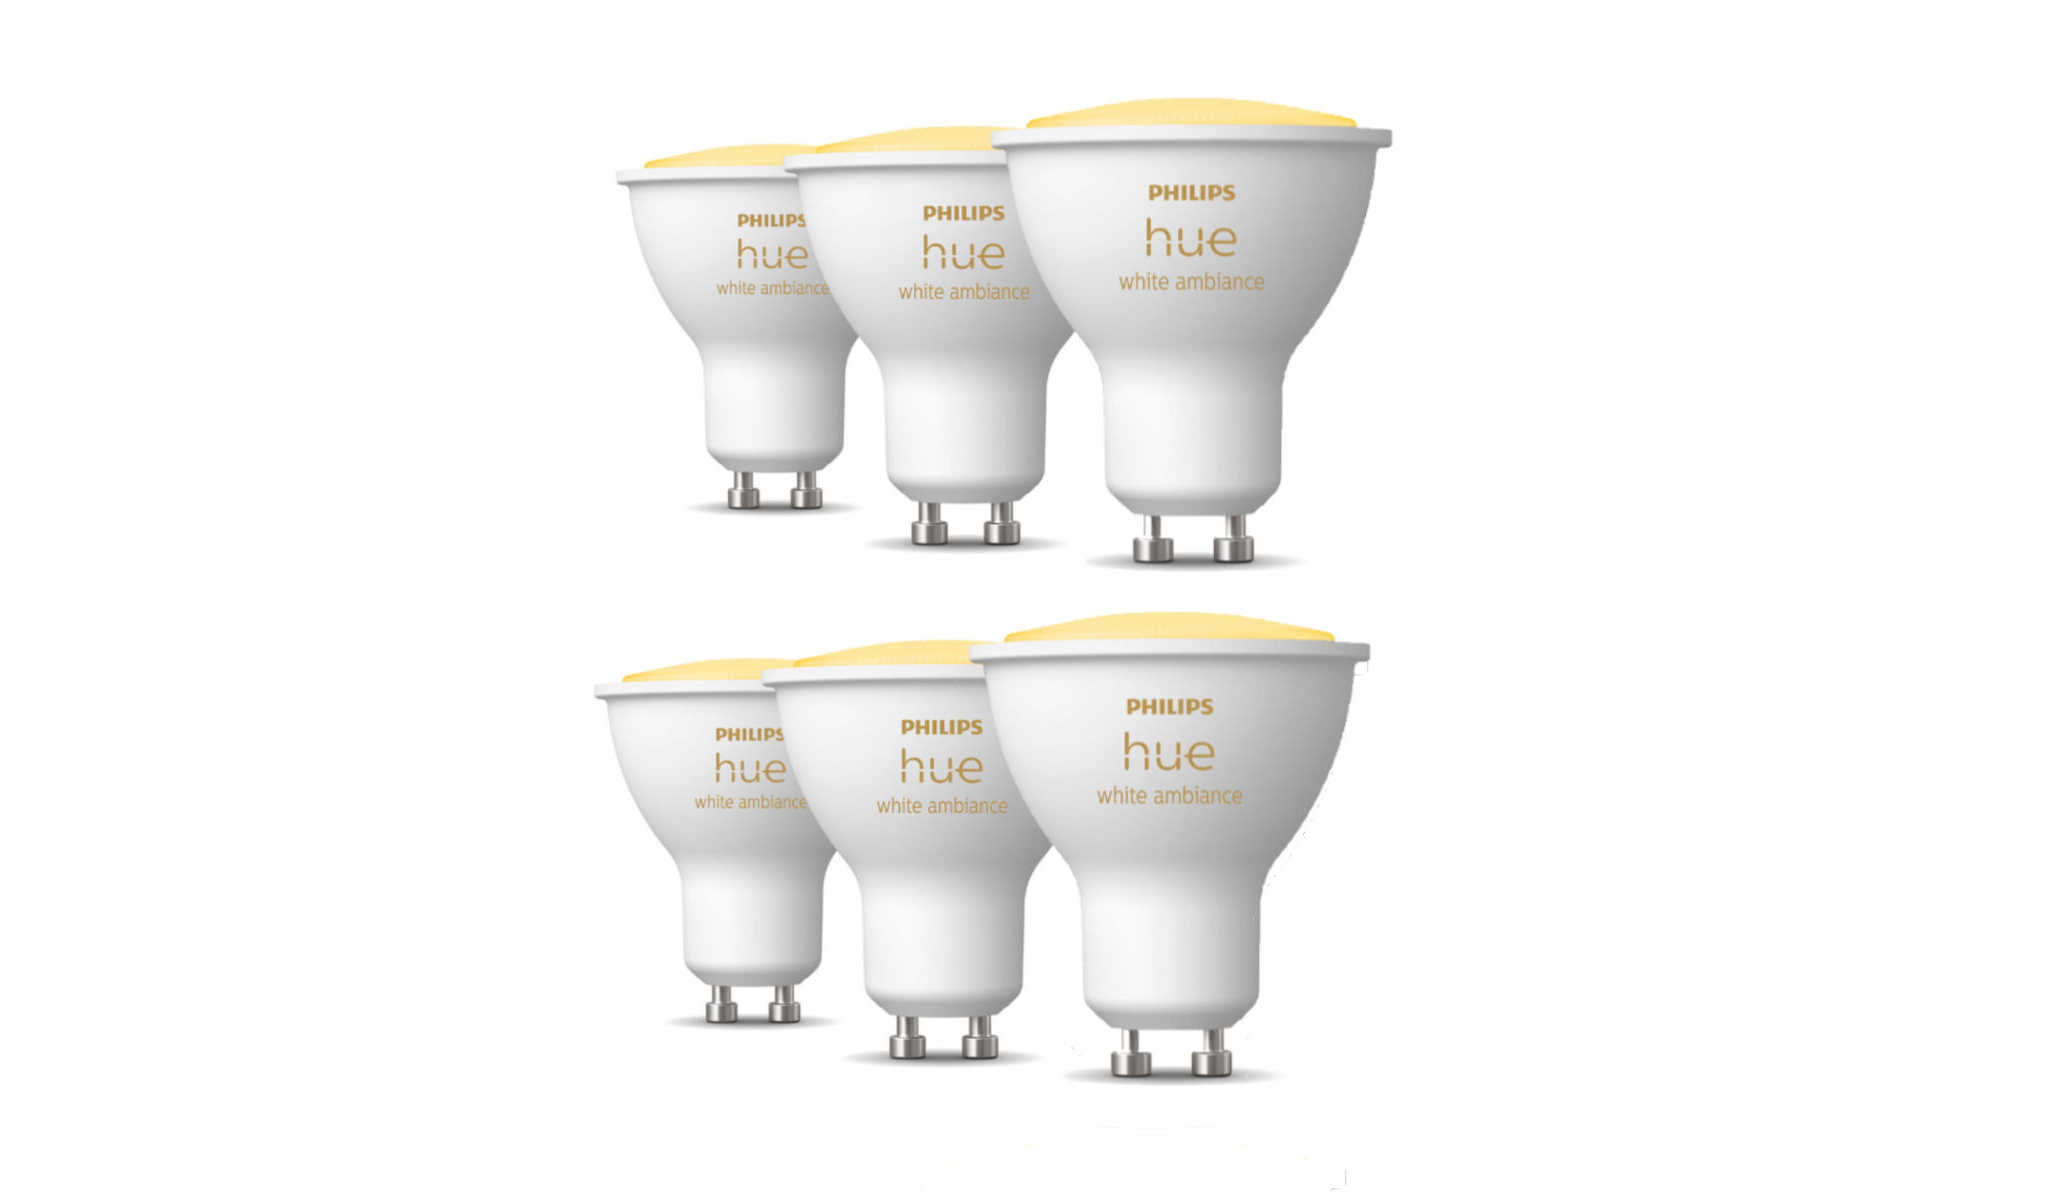 philips hue white ambiance spotsf1699360729